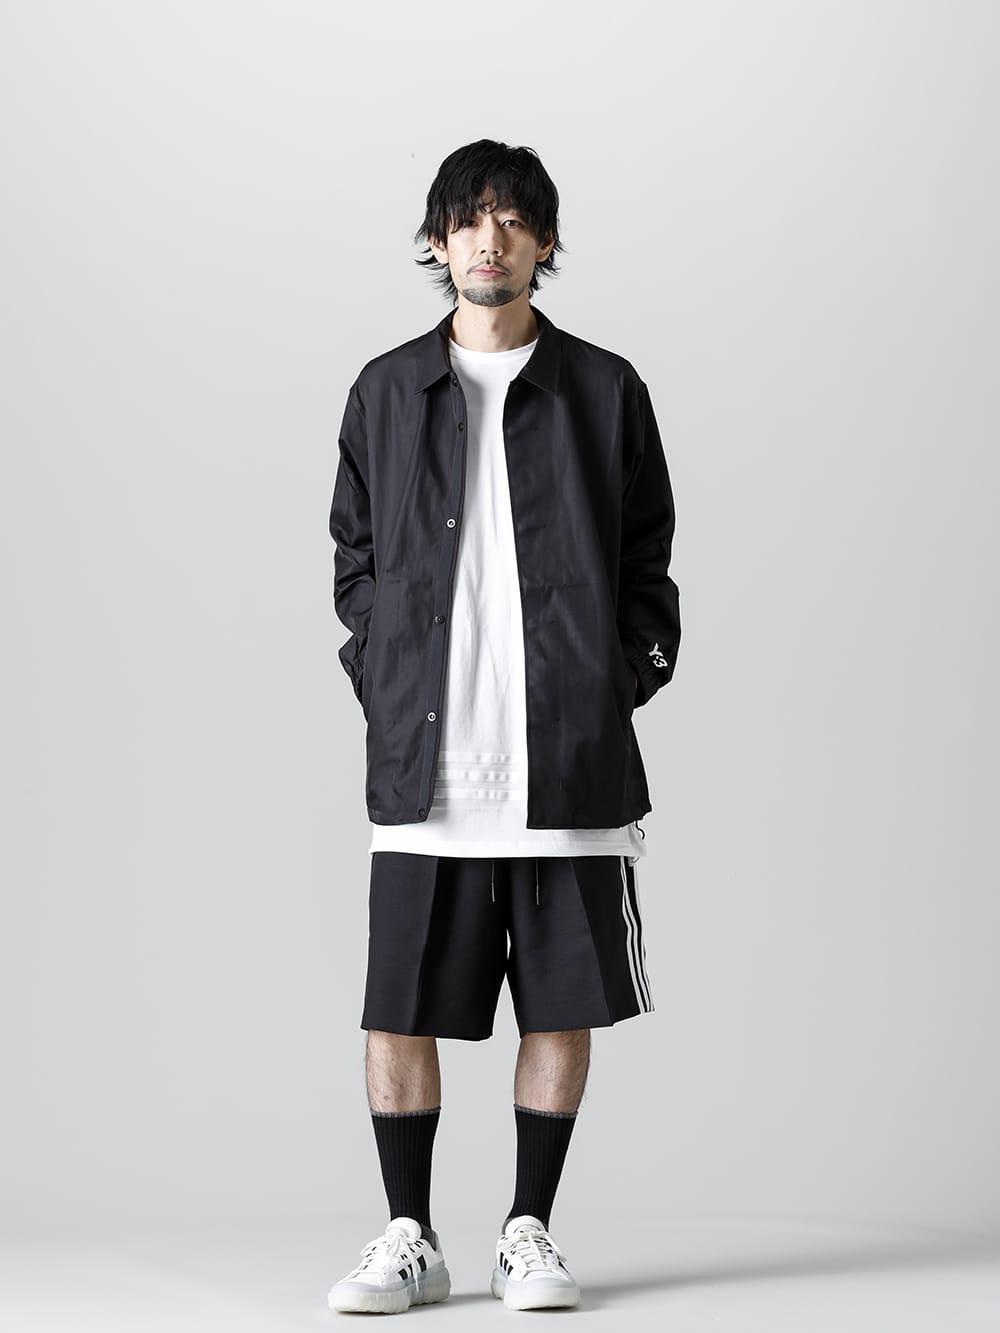 Spring Styling with Y-3 GFX Coach Jacket!! - FASCINATE BLOG